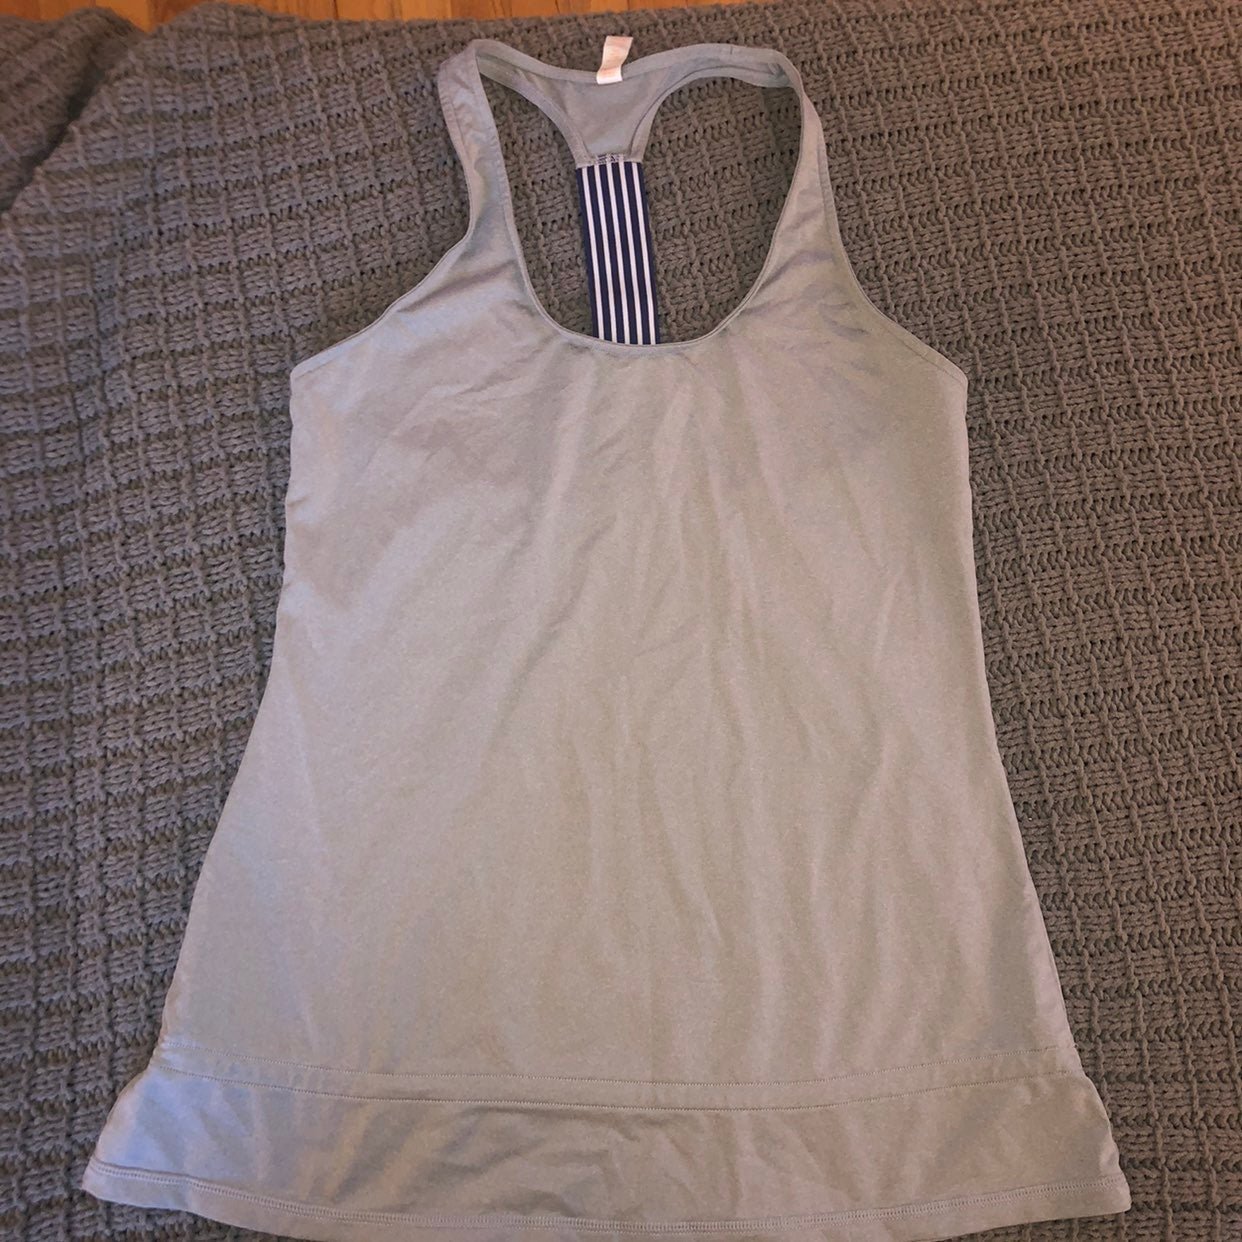 Authentic Lucy Brand Athletic Racerback Tann MKCJrafI9 for sale